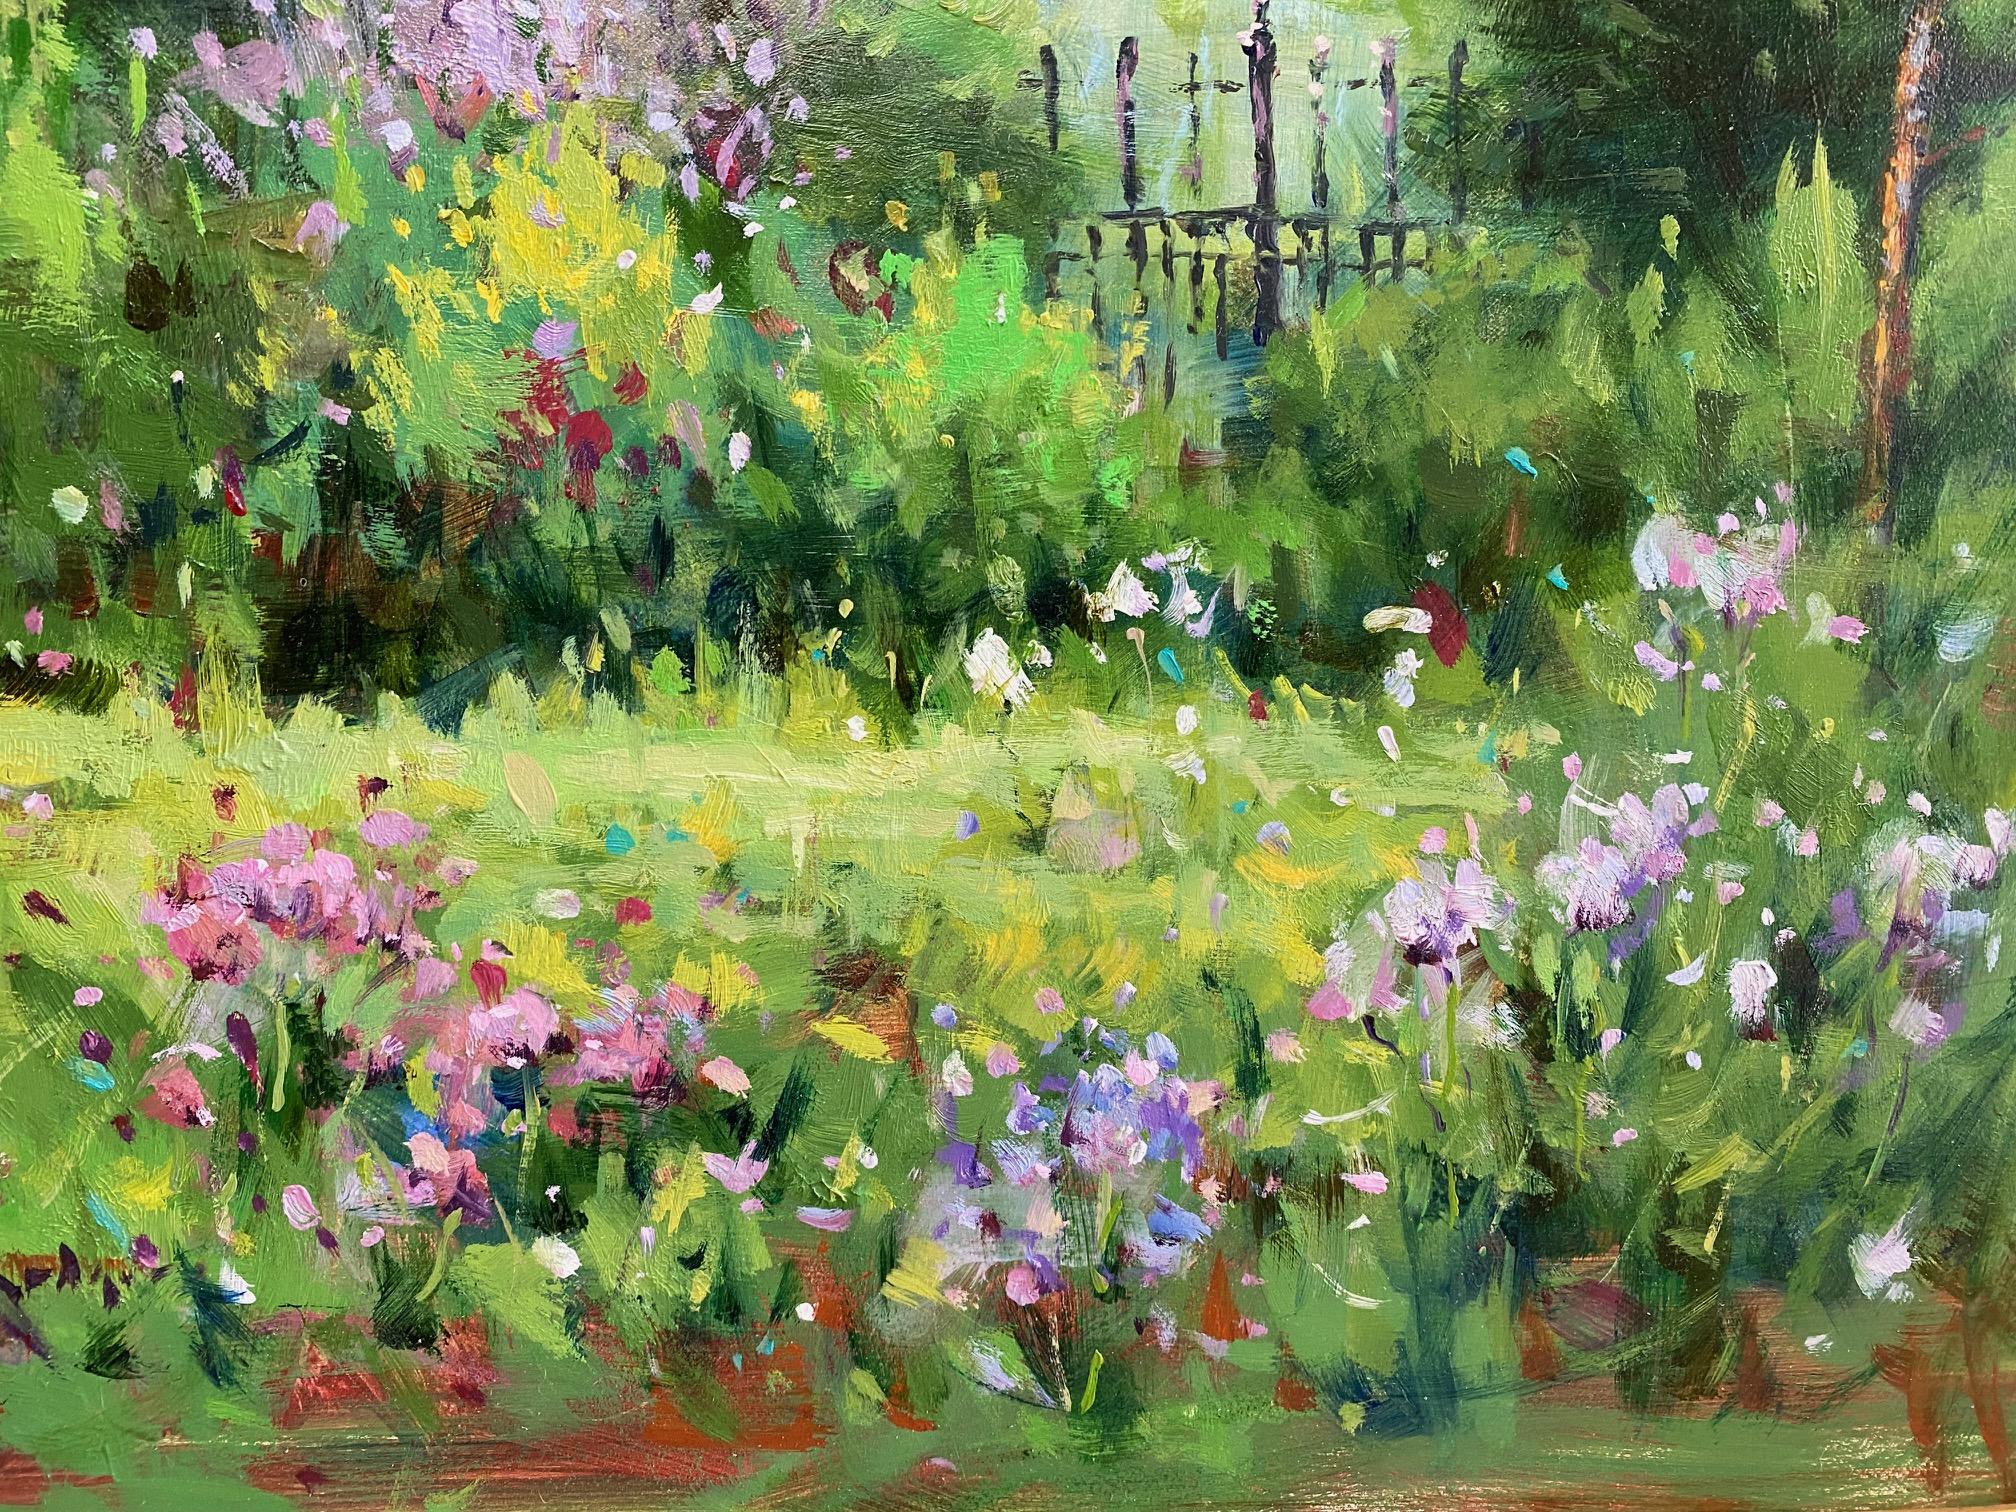 On a lovely spring day the newly planted florals with some sumptuous wildflowers mixed in, feel their way through the lush green grass, delighting us with their random appearance as the old wrought iron garden gate takes a prominent spot in the